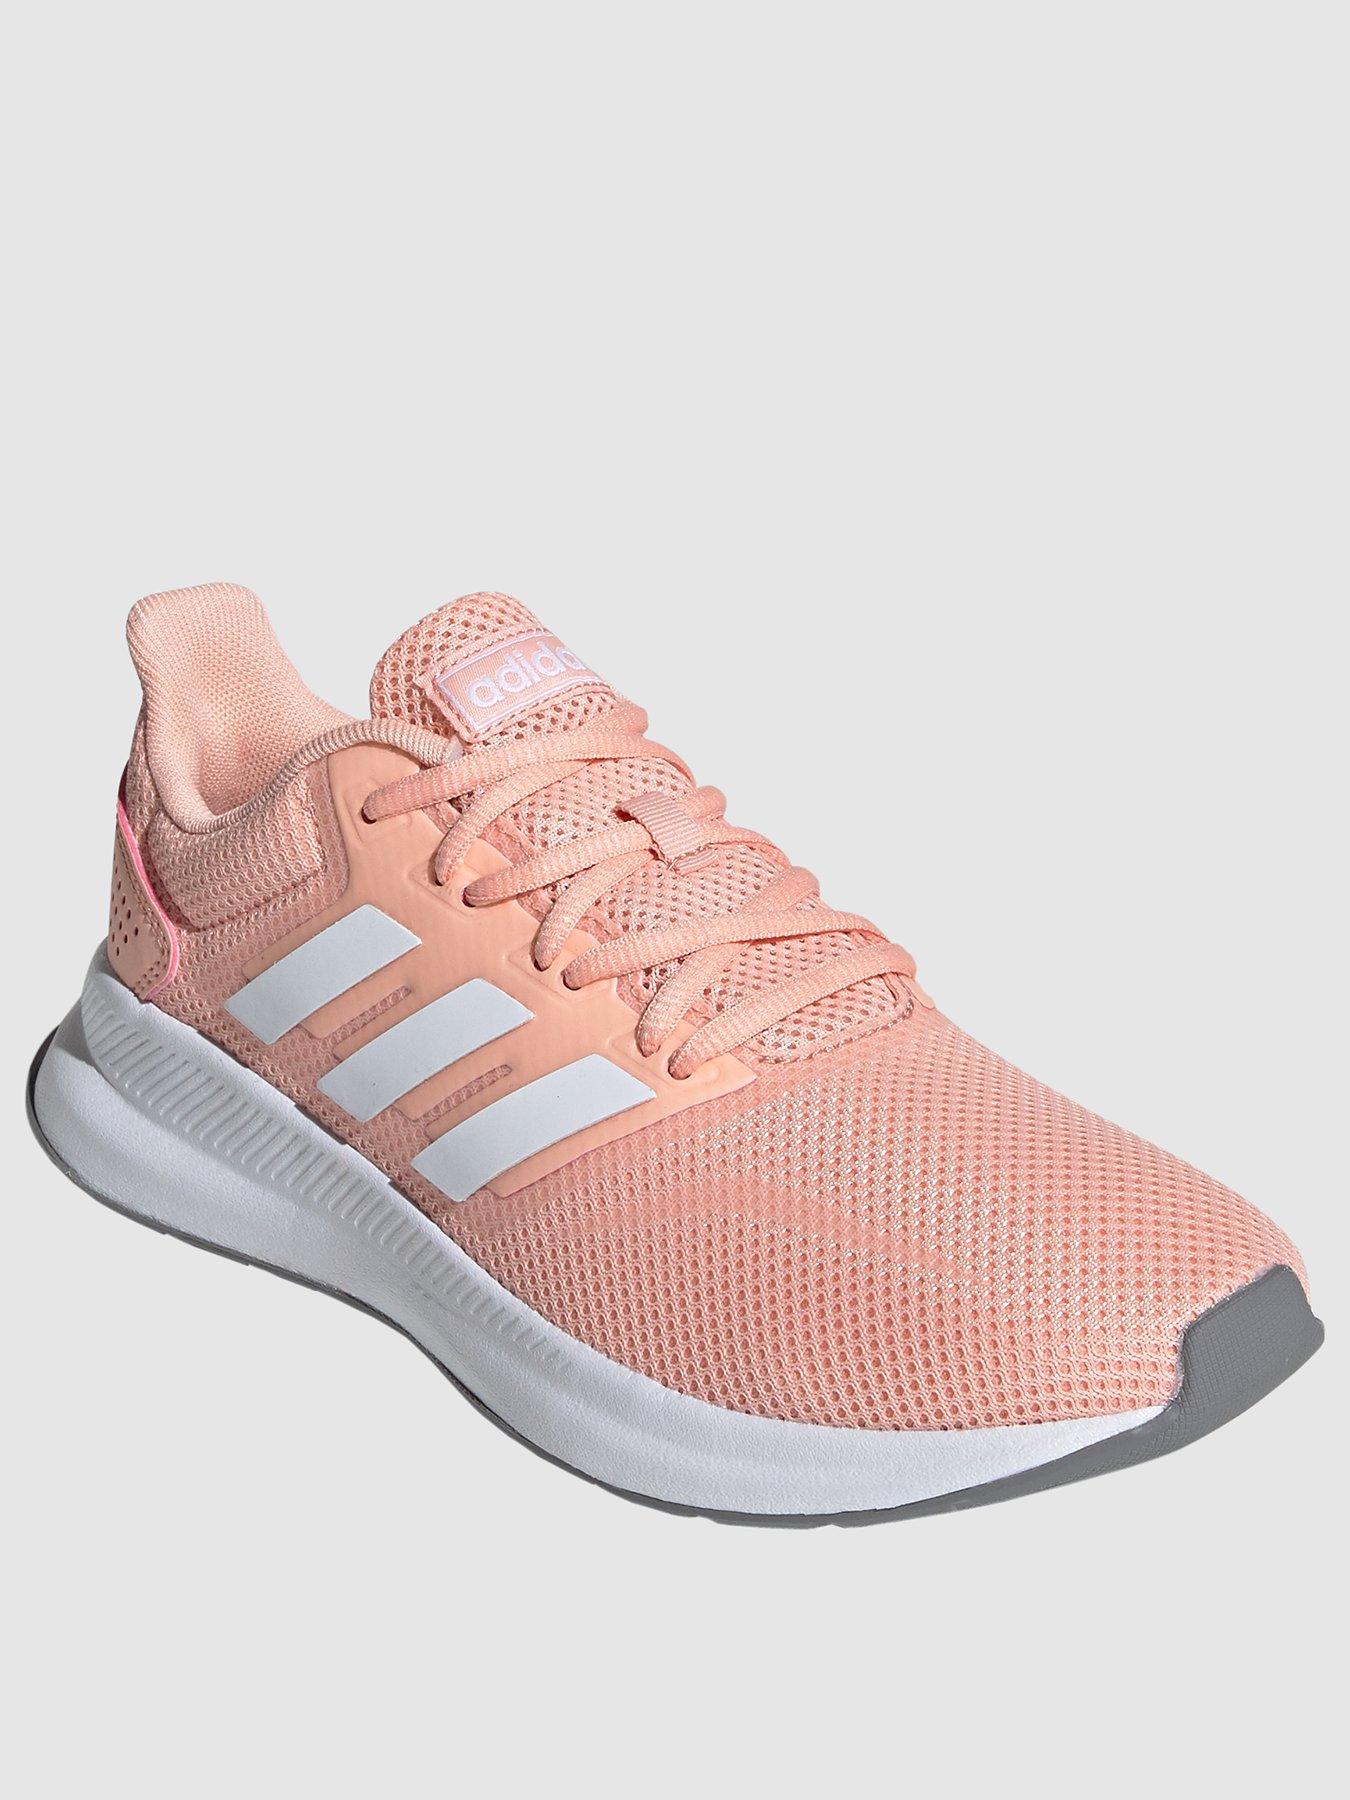 coral adidas trainers